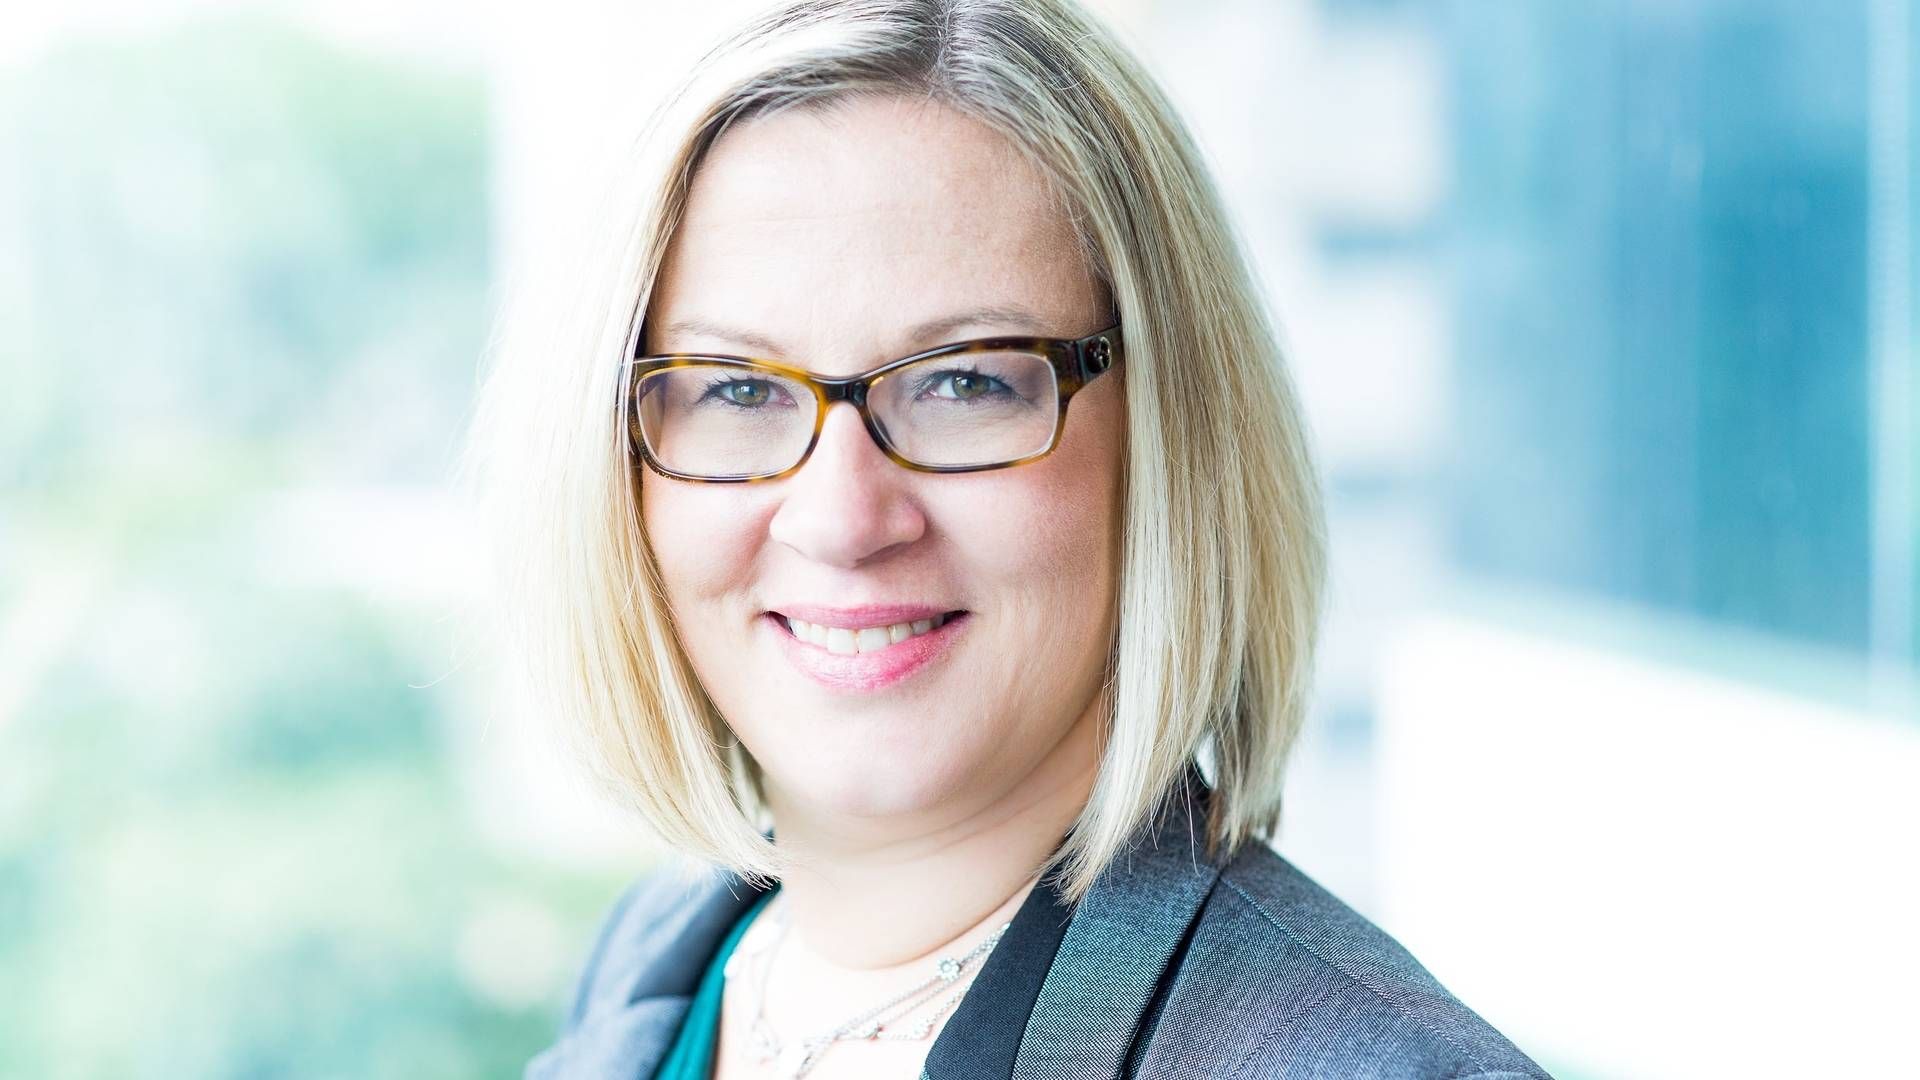 Flexibility and the possibility to work from home are important factors to many young candidates, says Stine Martinussen, CEO and founder of Helm Specialist Recruitment in Singapore. | Photo: PR